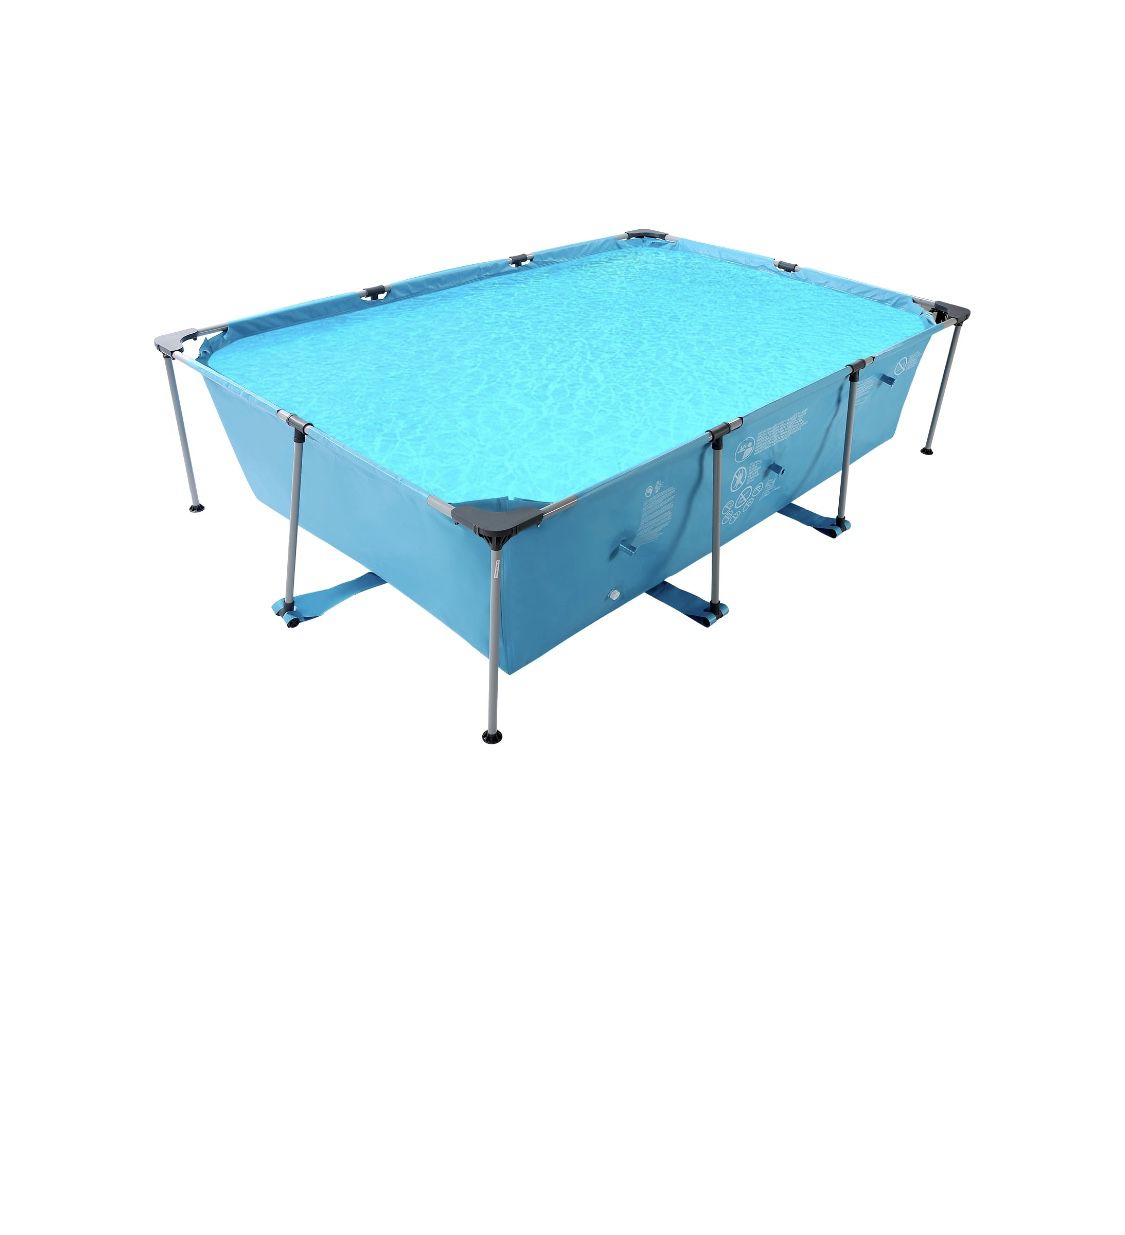 BRAND NEW Gasky Swimming Pool Above Ground Outdoor 10 ft Rectangular Frame Pools Blue Family Outdoor Use 118" X 79" X 29.5"